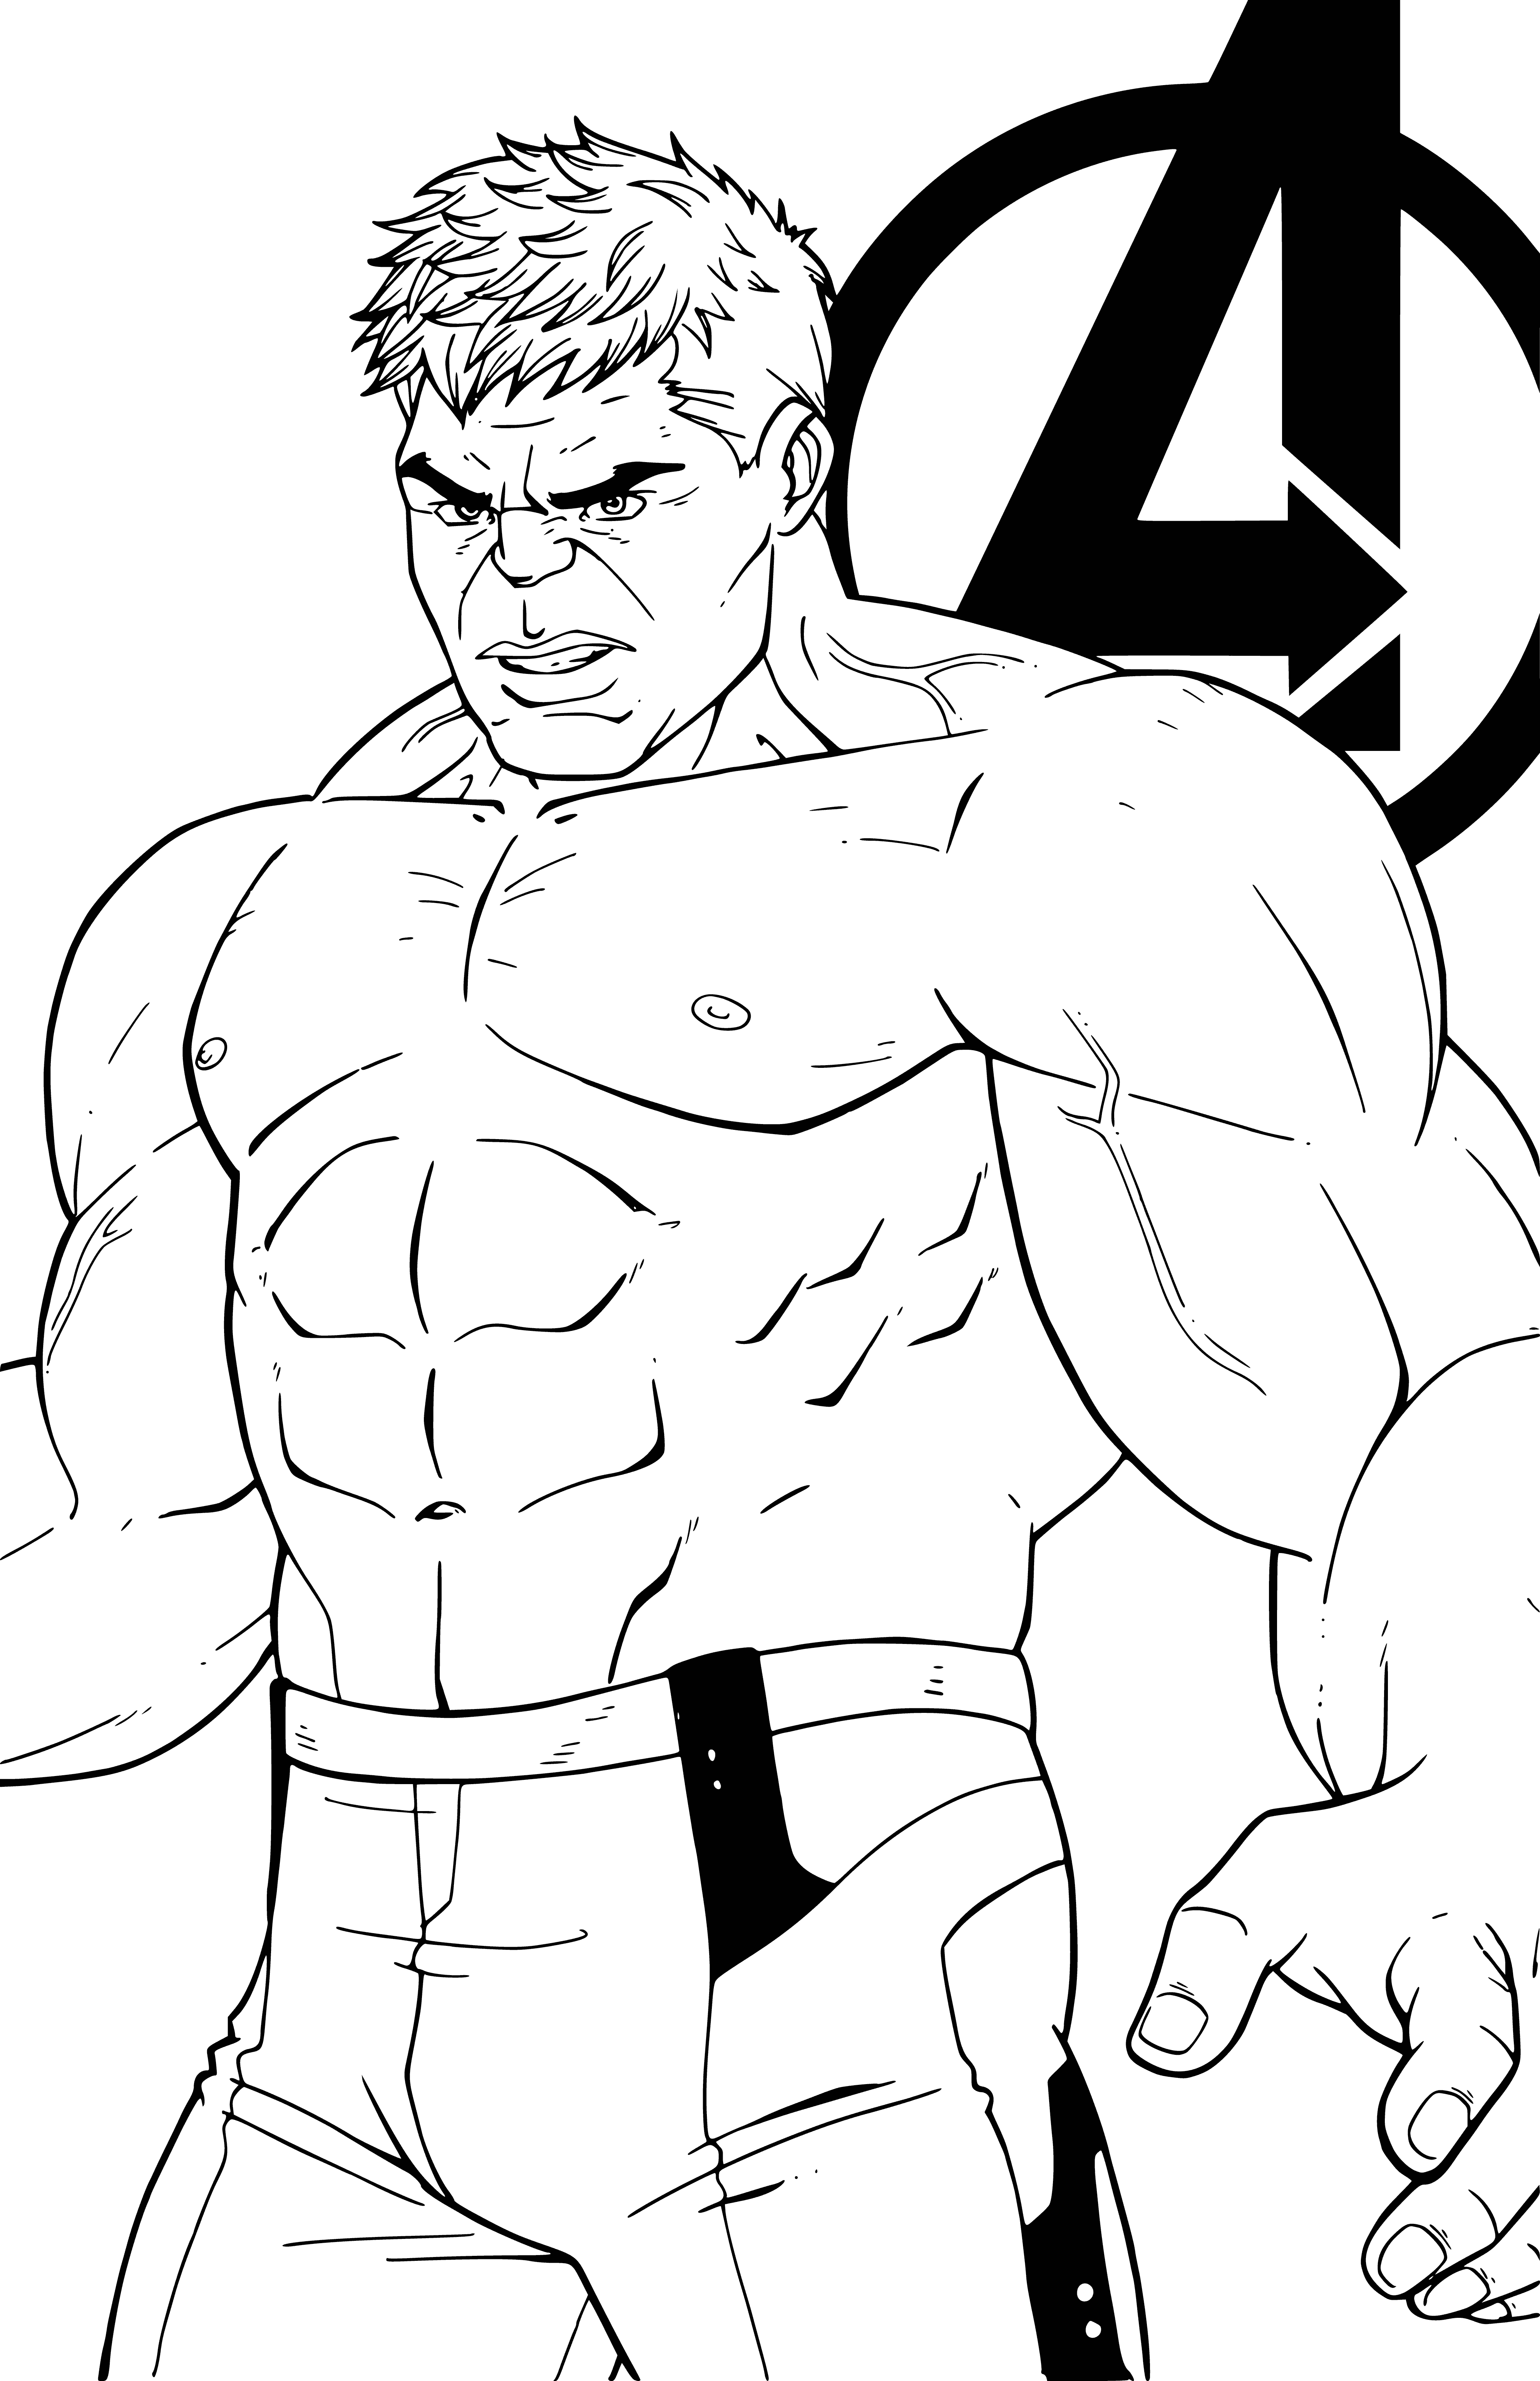 coloring page: Large, green, muscular man with torn purple pants & no shirt. Eyes angry, mouth open in roar, fists clenched.